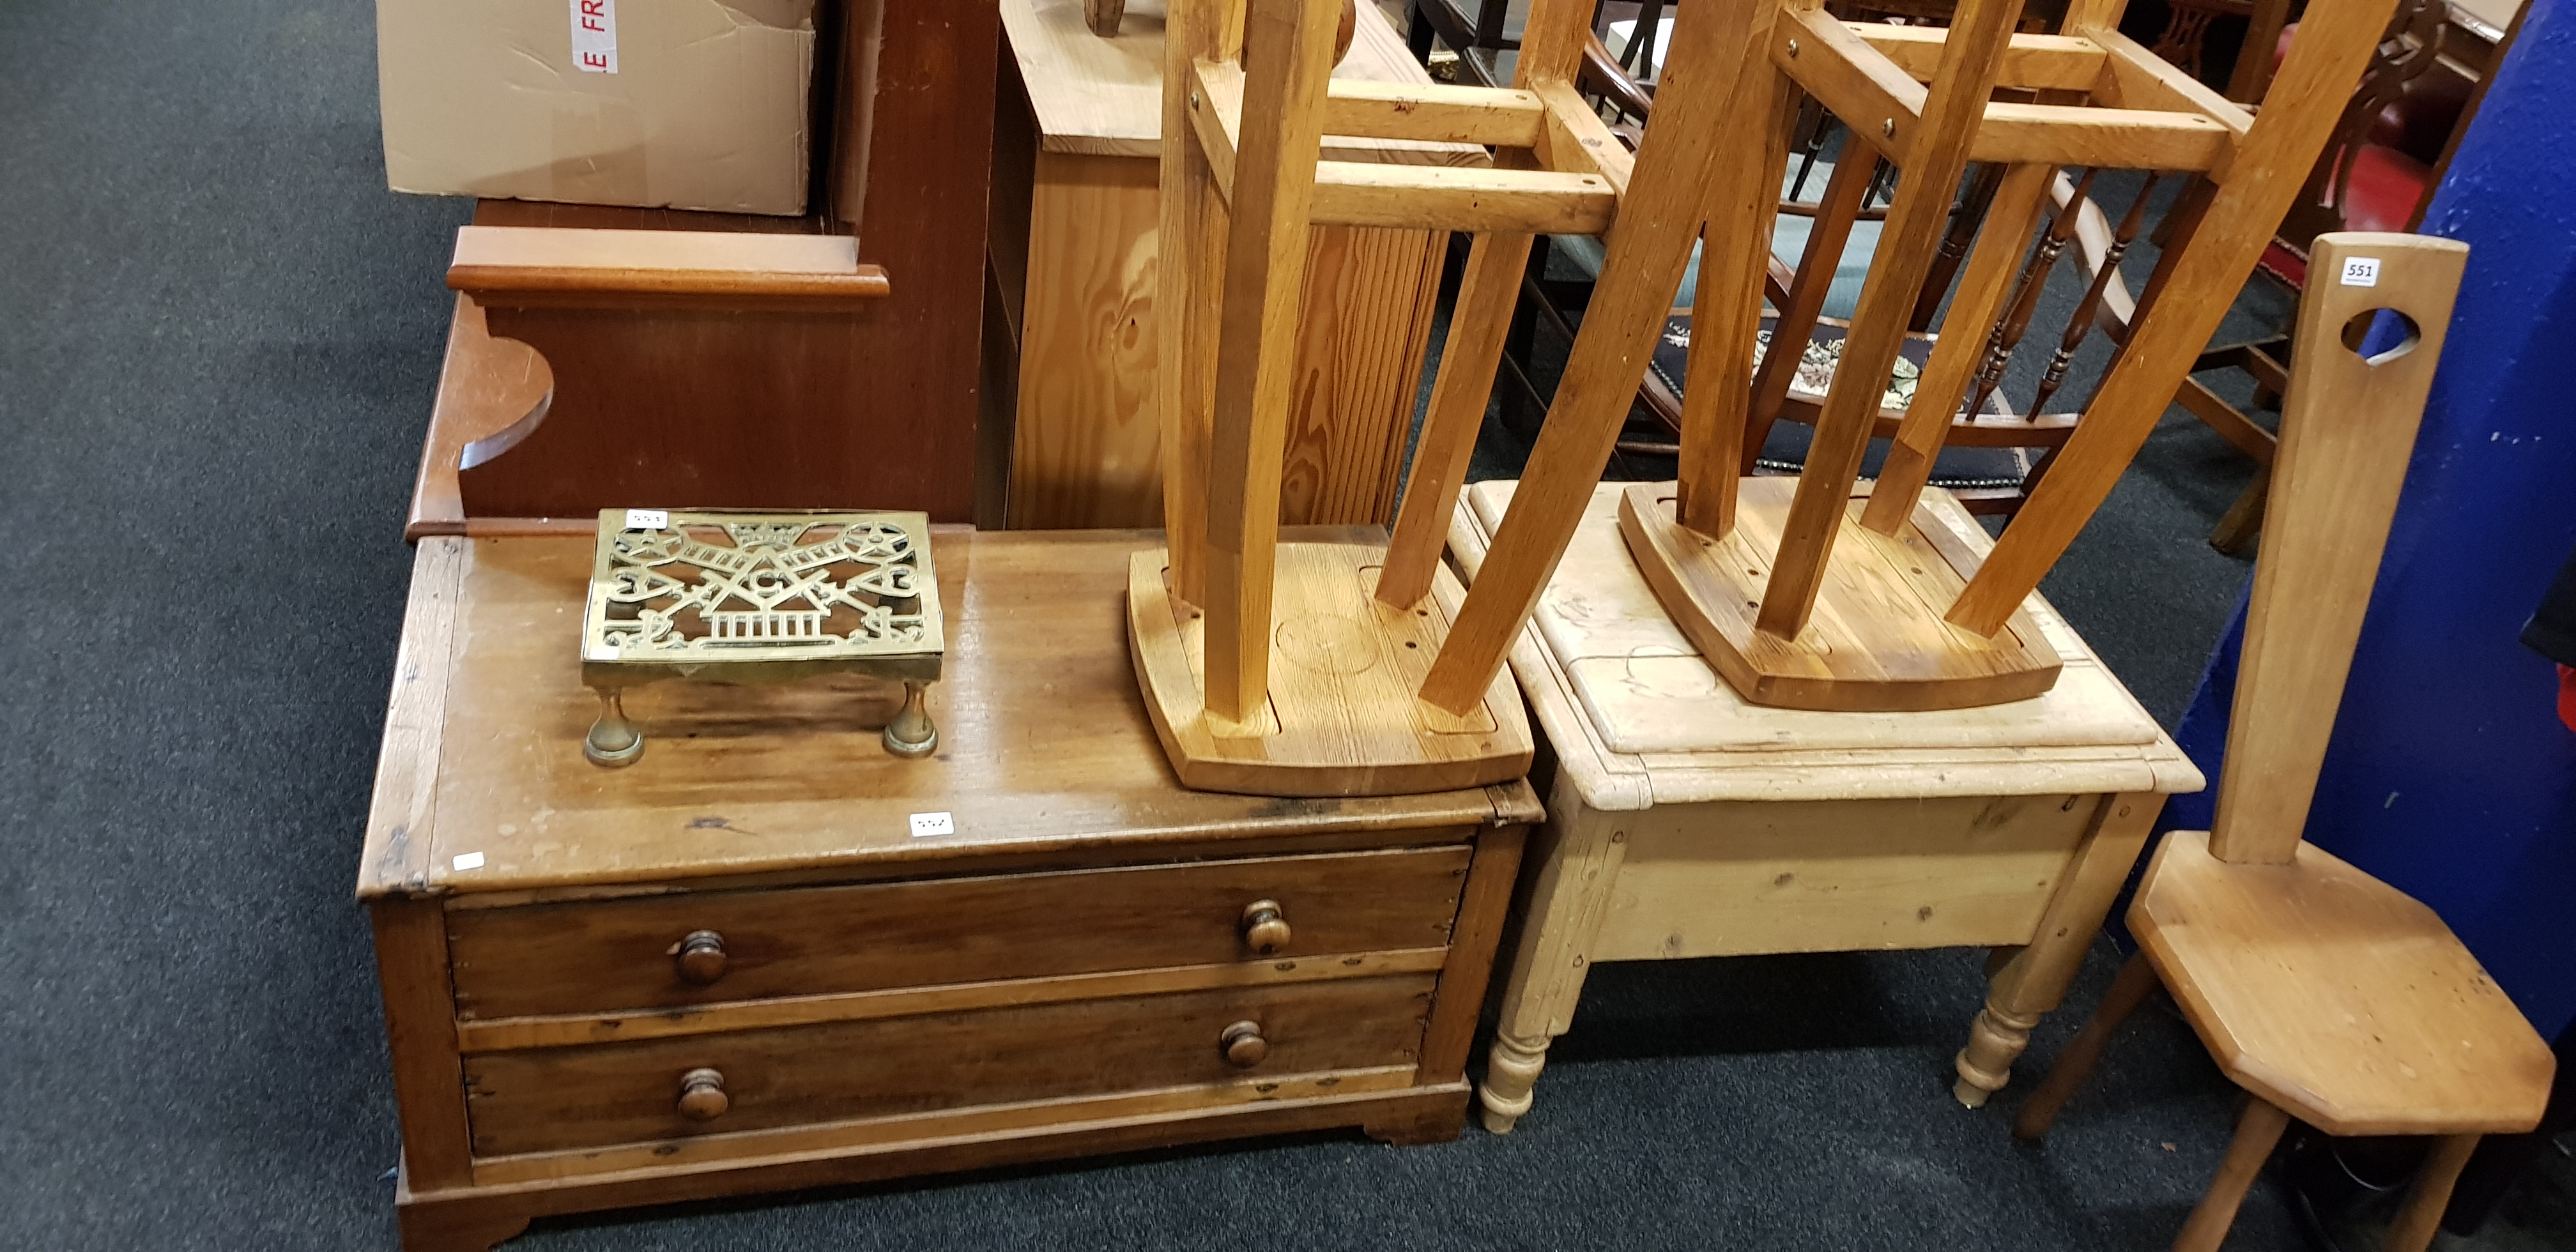 2 HIGH STOOLS, PINE COMMODE AND DRAWERS